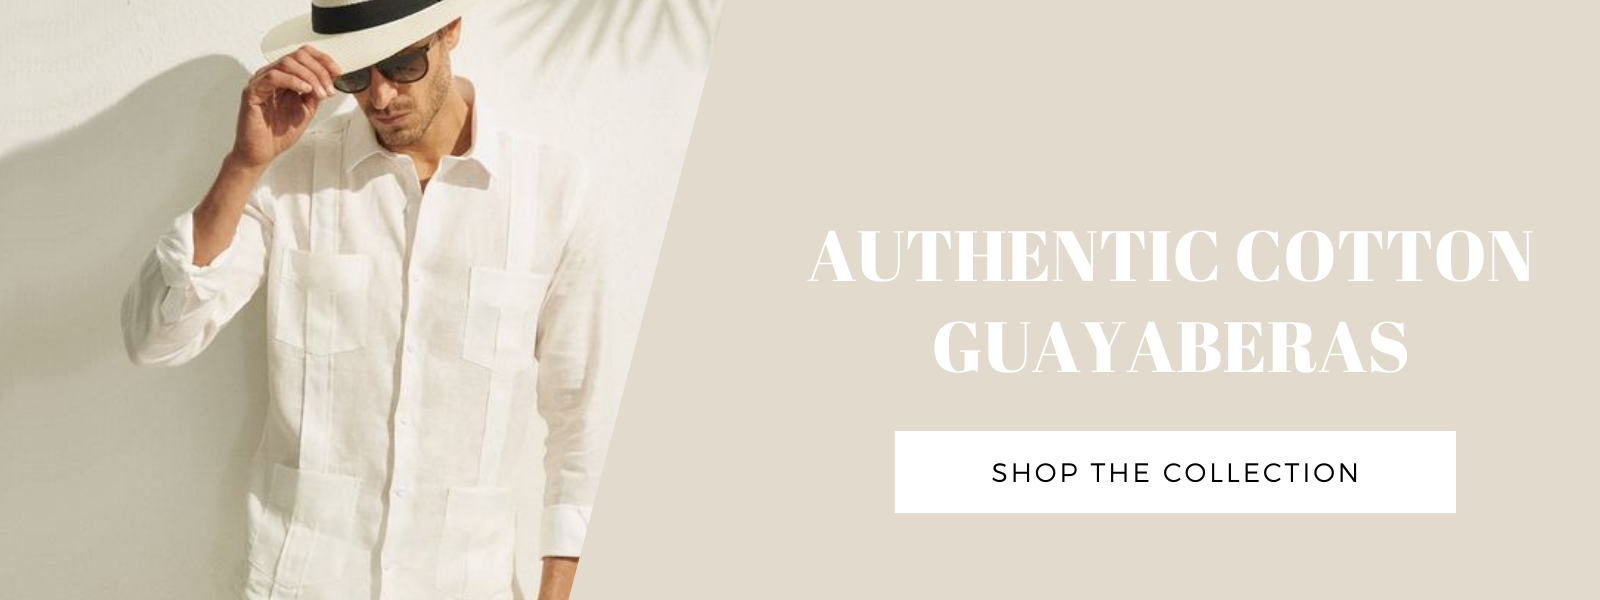 Style Guide: How to Wear and Rock the White Guayabera | Linen Horse